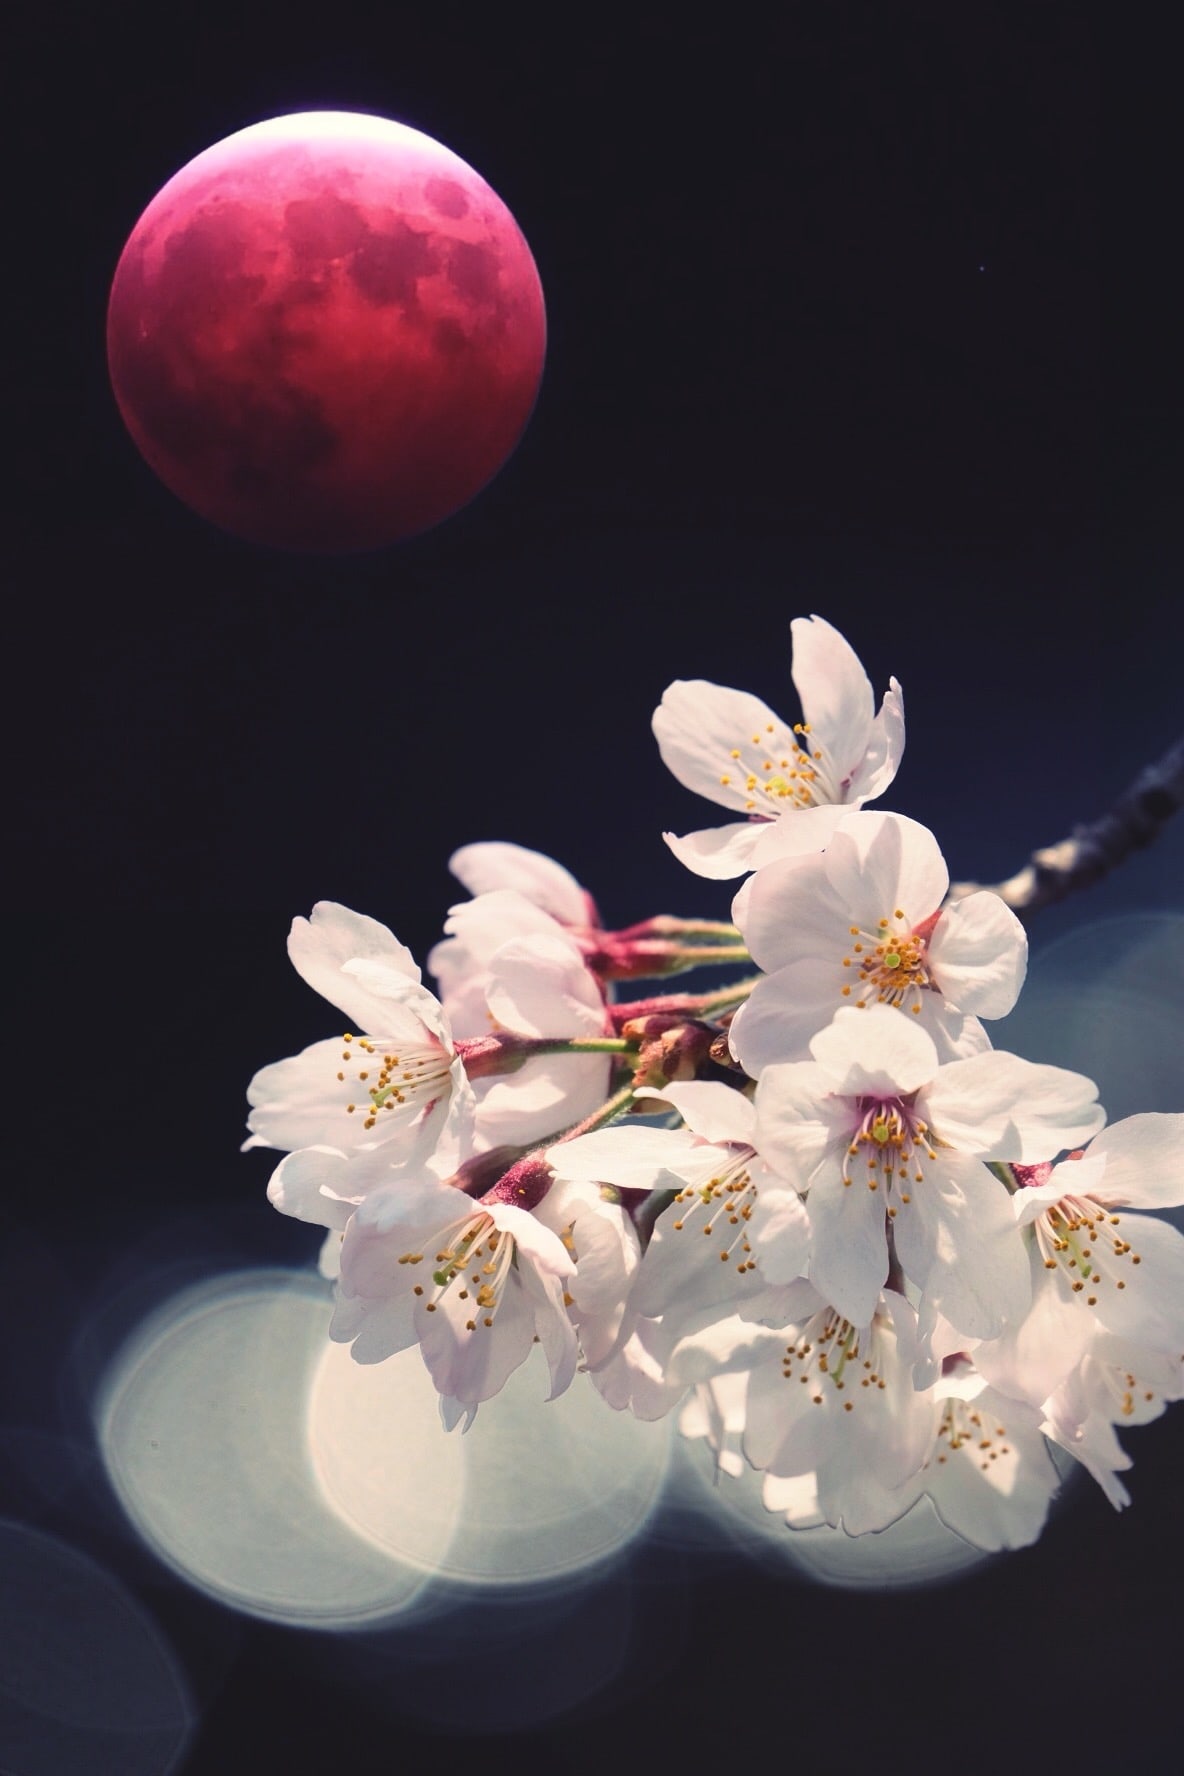 cherry blossoms and a full moon in the back